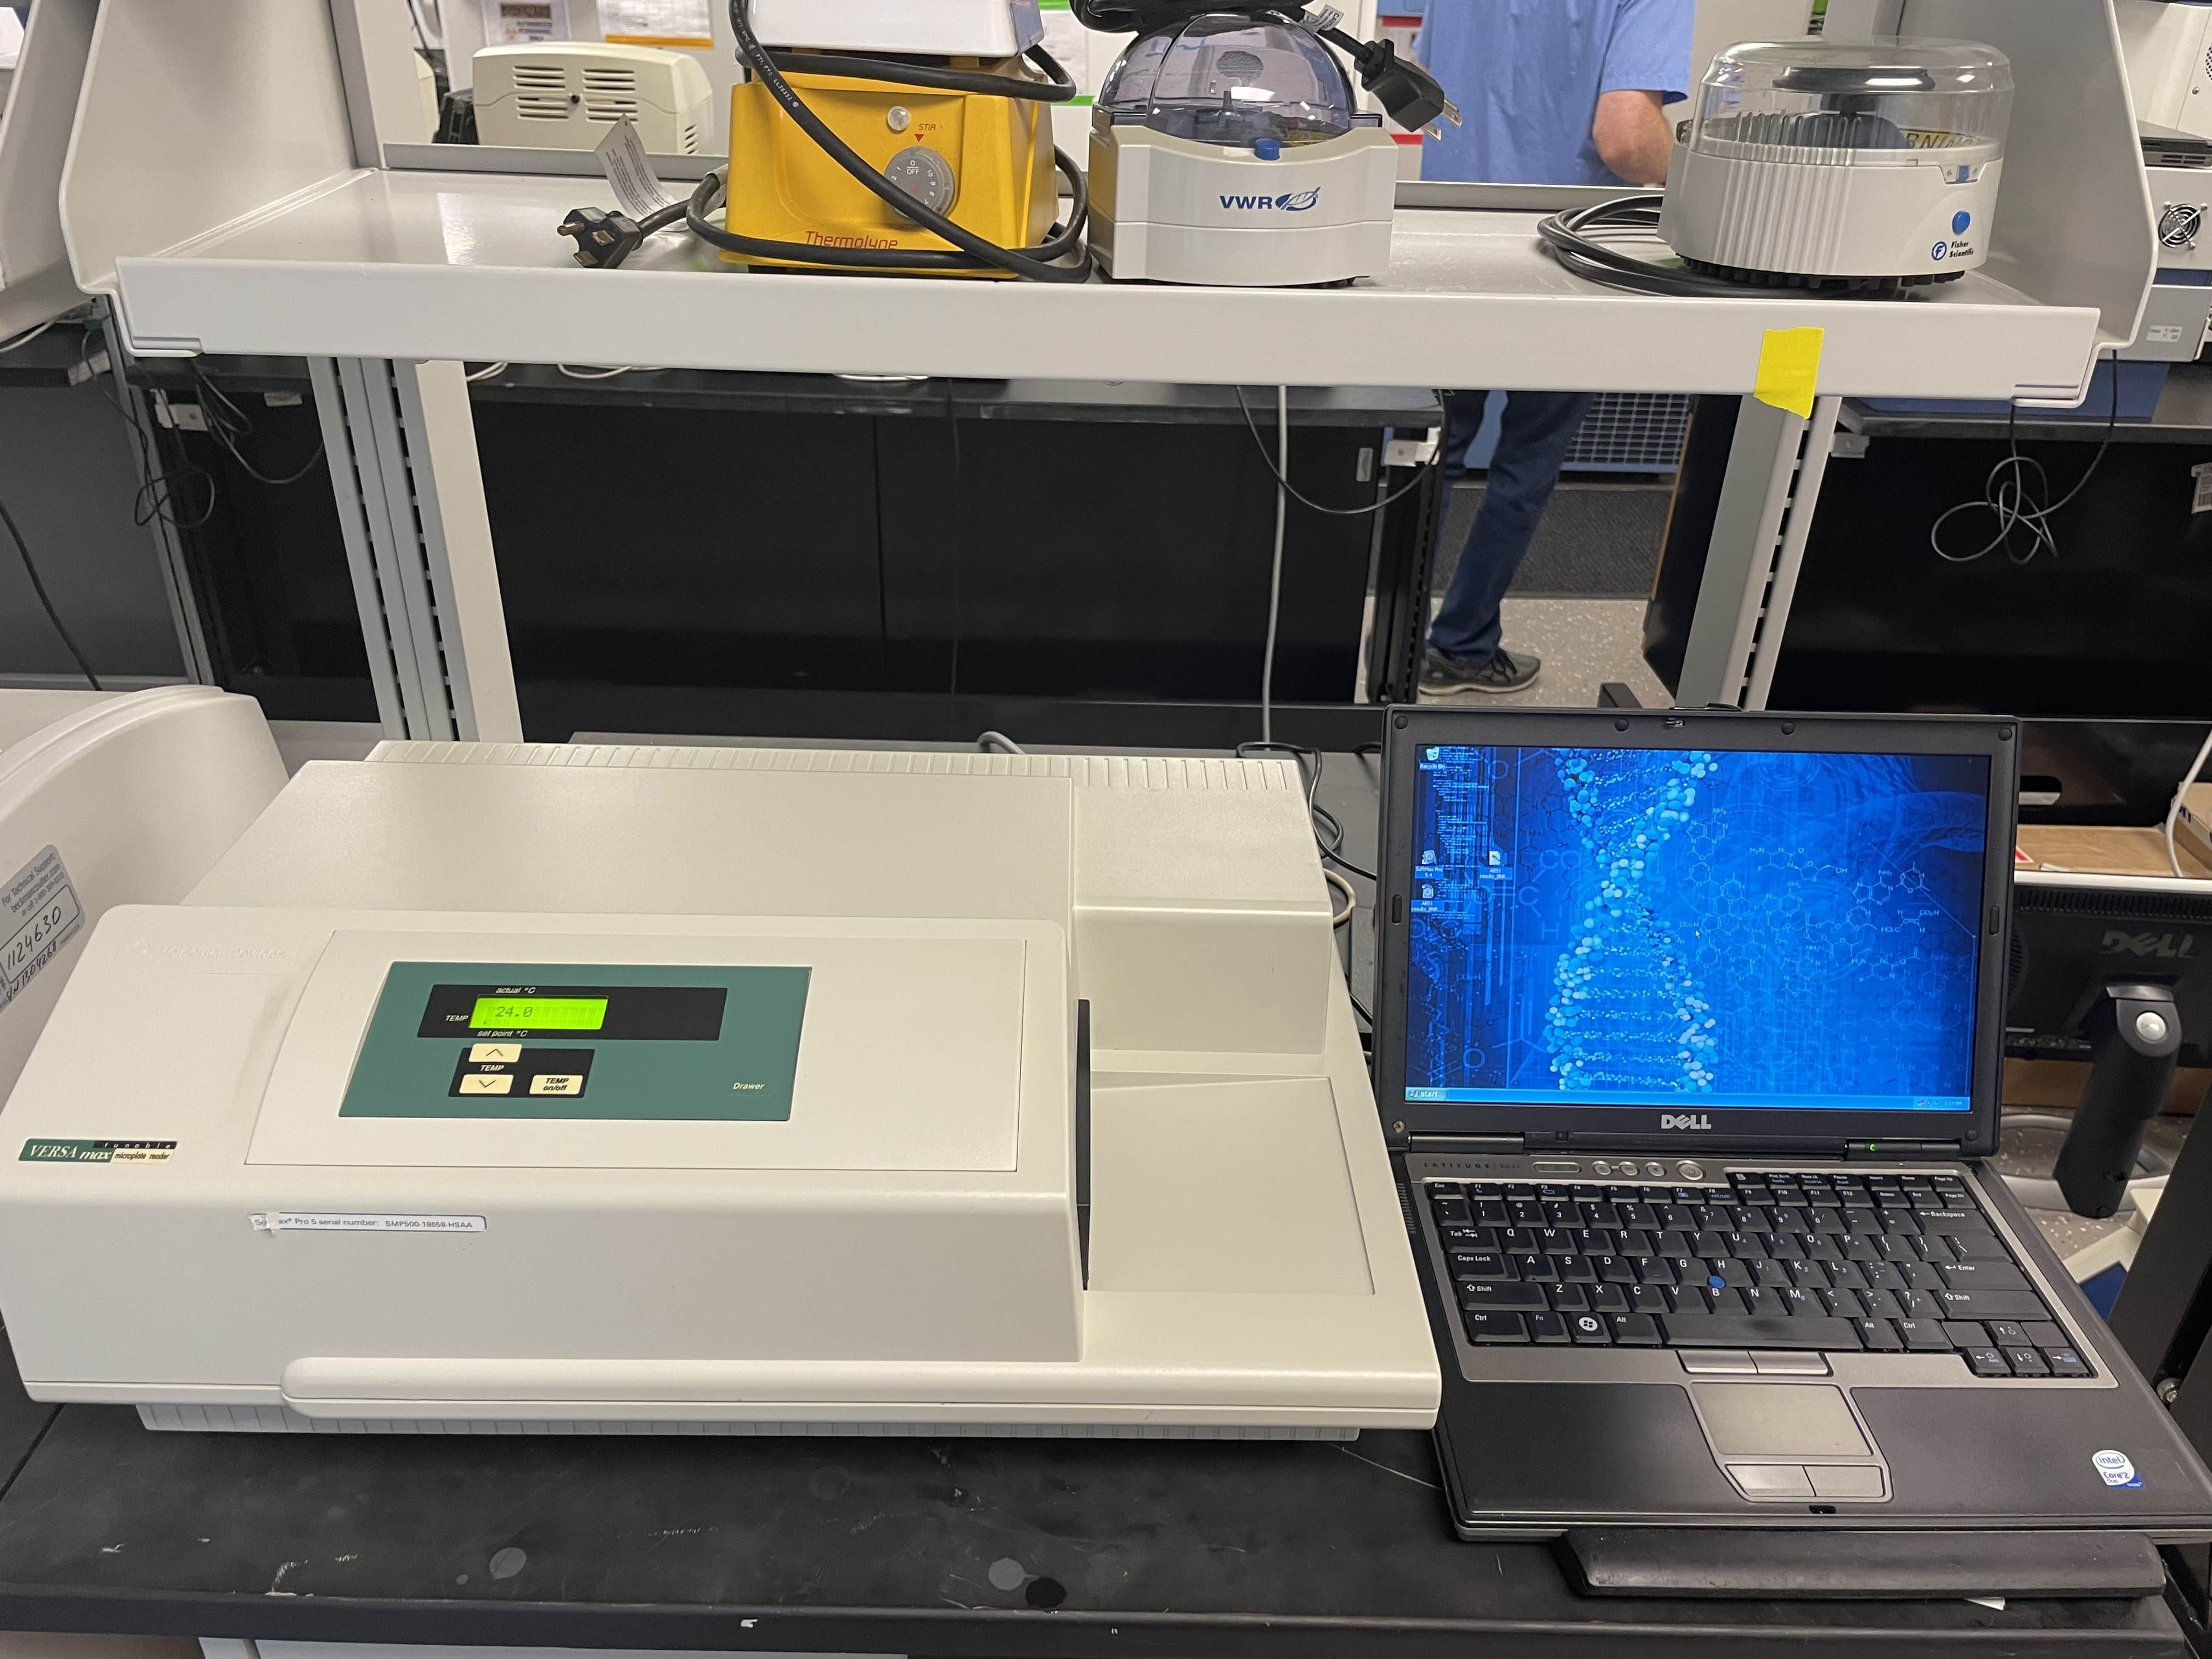 Molecular Devices VersaMax Spectrophotometer System-New Performance Testing-ABS1 Plate Validation